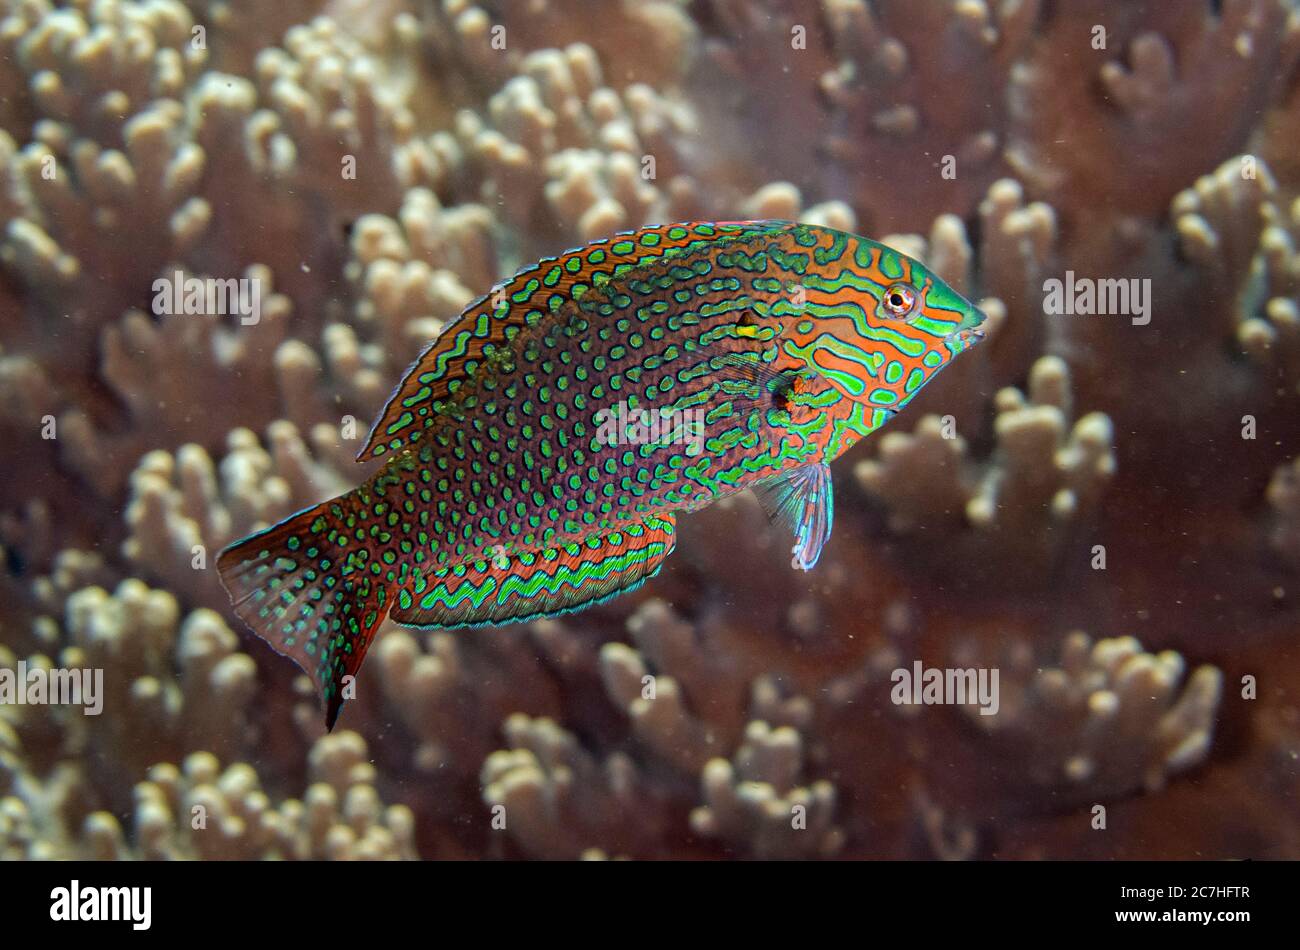 Male Vermiculated Wrasse, Macropharyngodon meleagris, Tanjung Usi 1 dive site, Bangka Island, north Sulawesi, Indonesia, Pacific Ocean Stock Photo